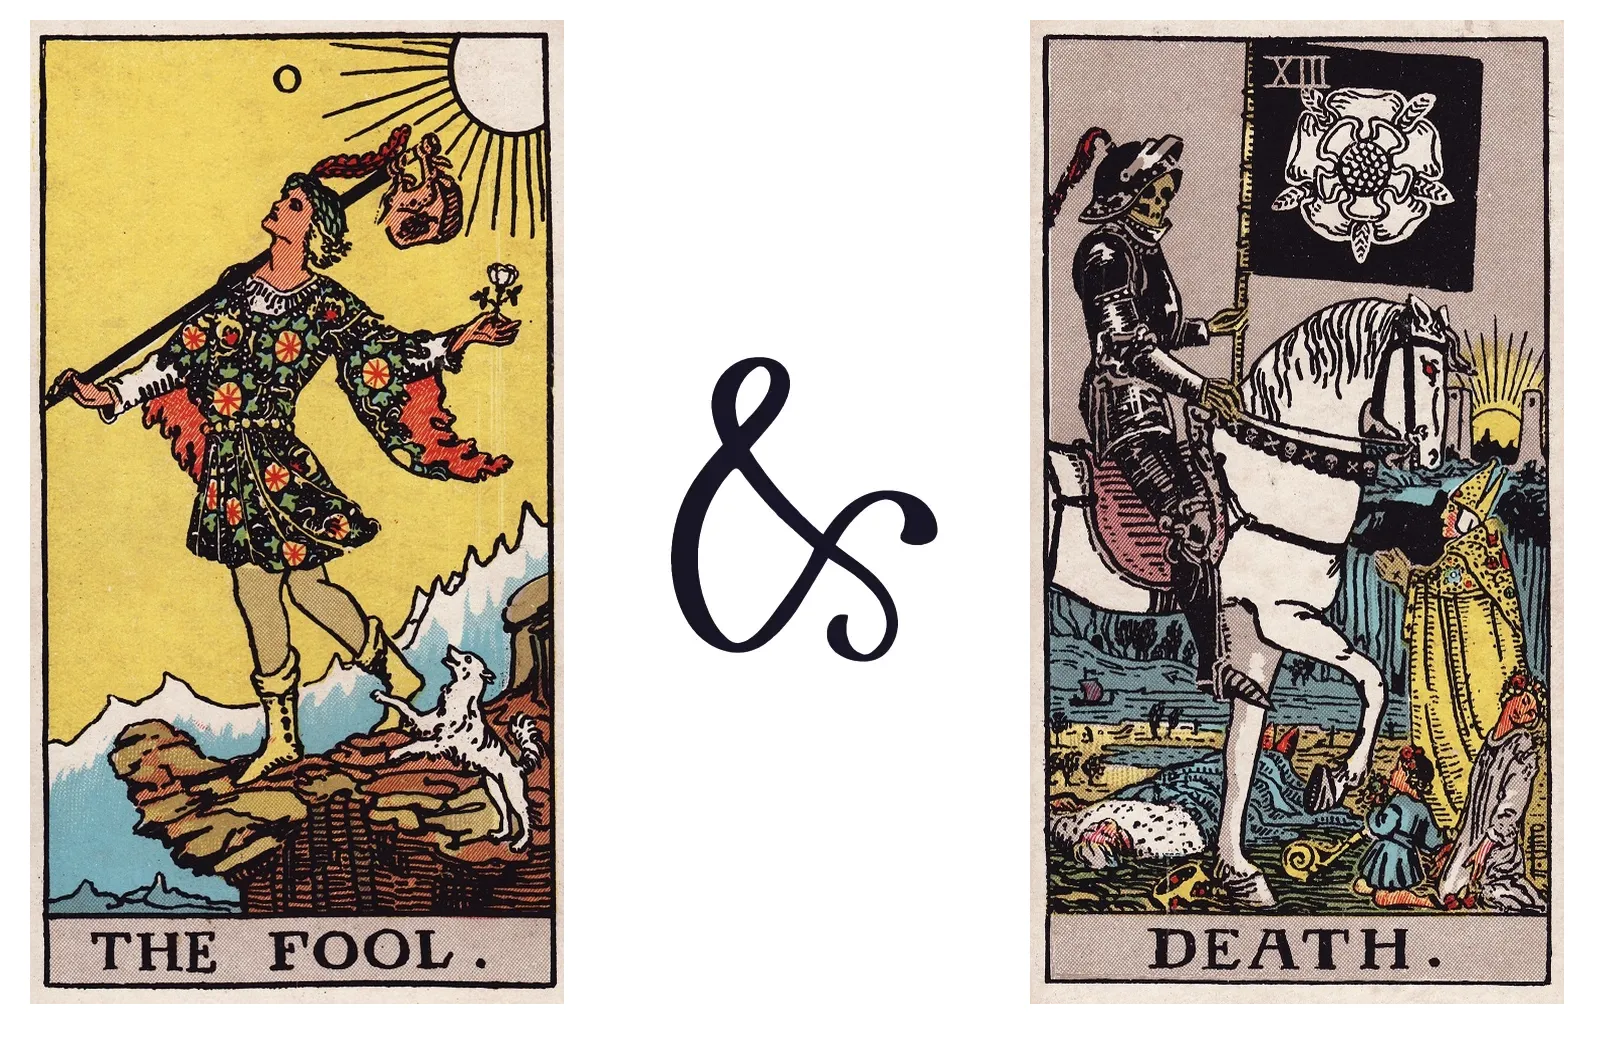 The Fool and Death